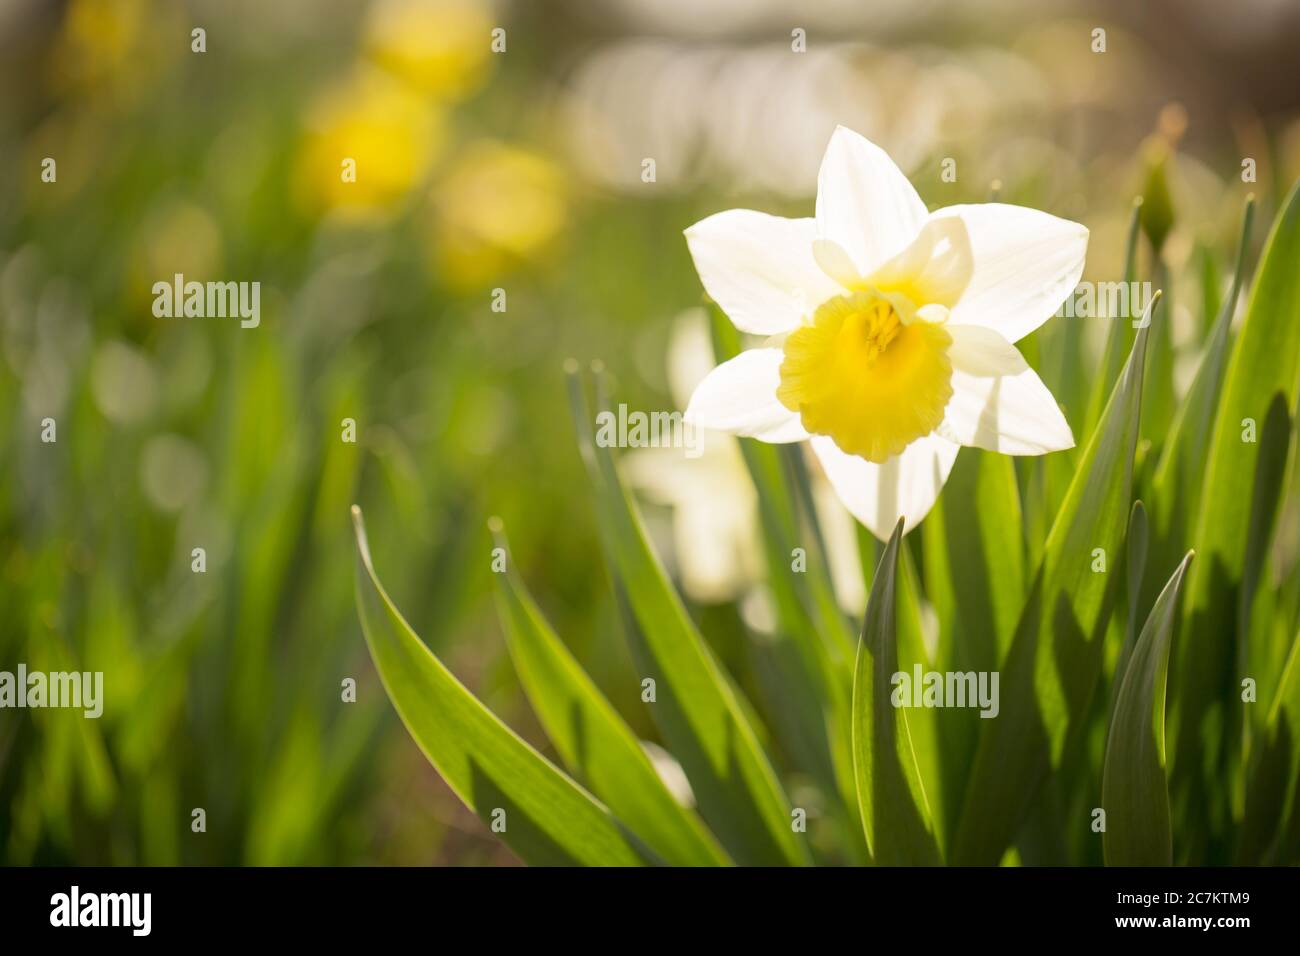 White Narcissus, Early spring, Garden, Finland Stock Photo